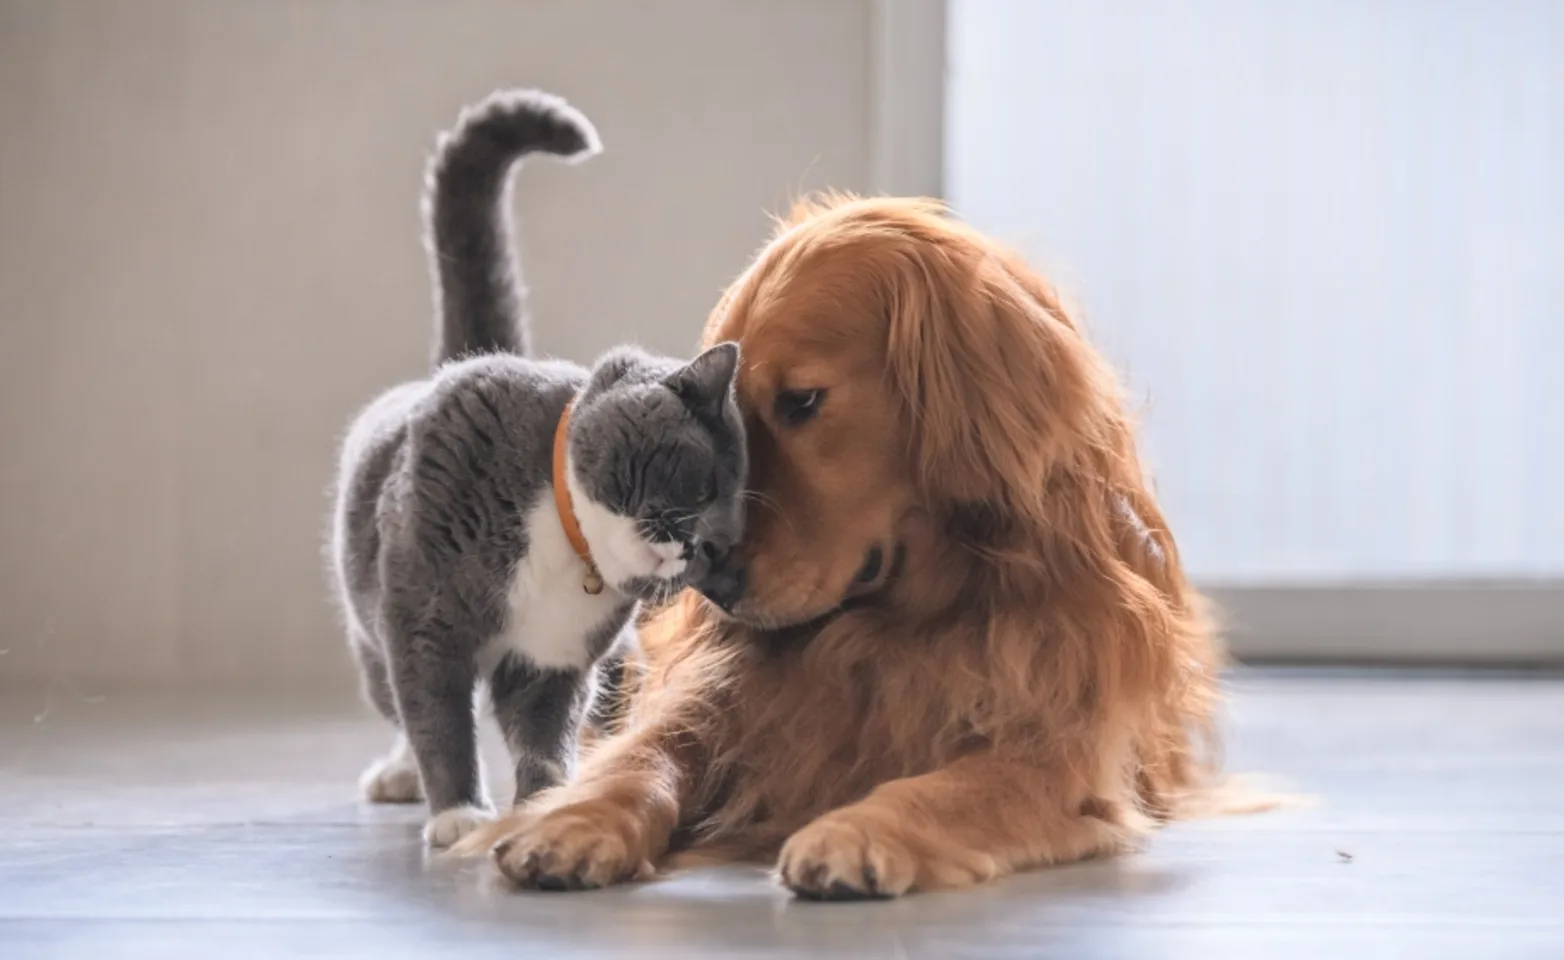 A dog and cat snuggling